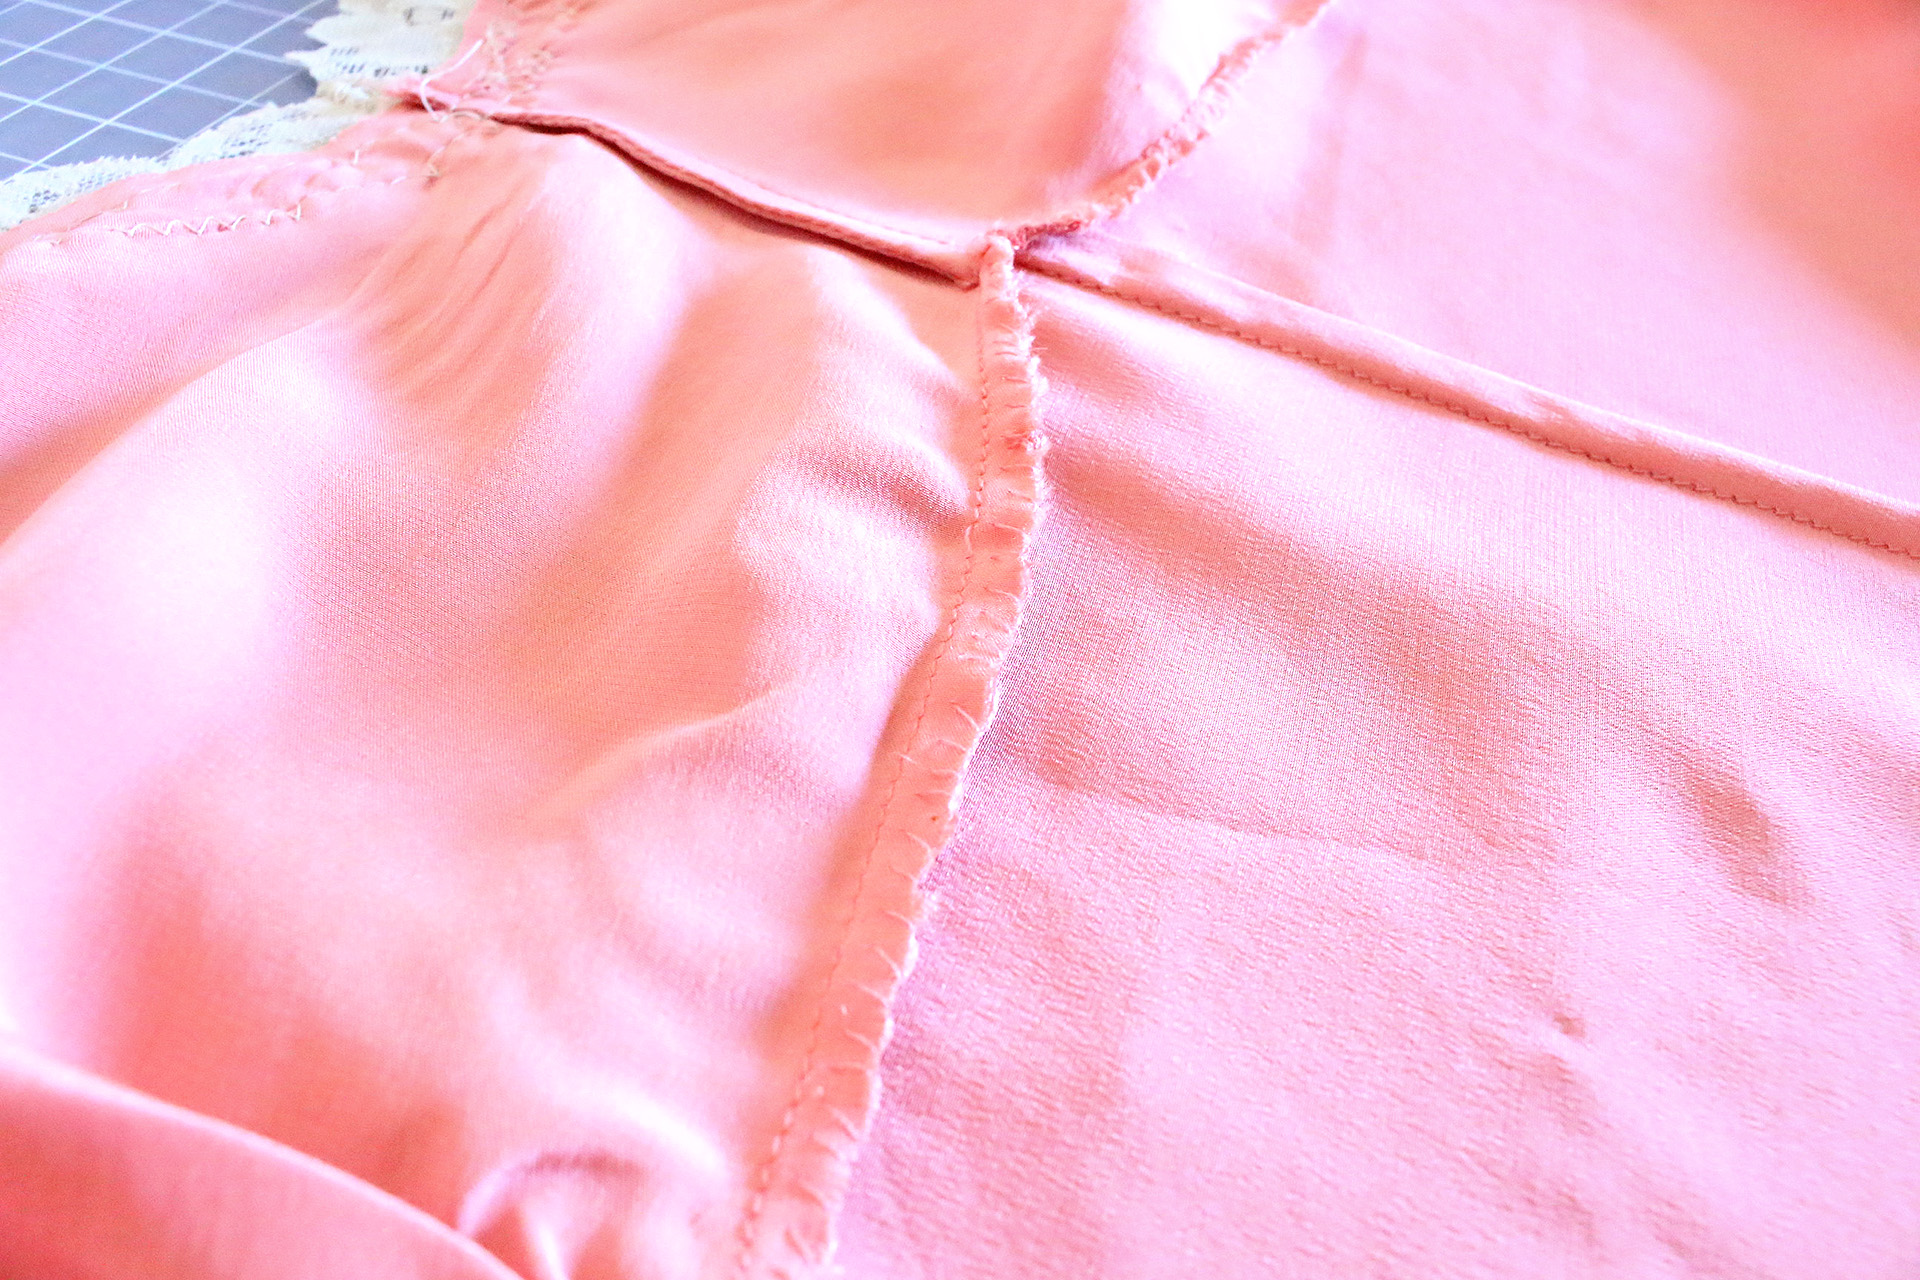 Vintage Inspired Slip Interior detail, hand sewing and French seam | @vintageontap